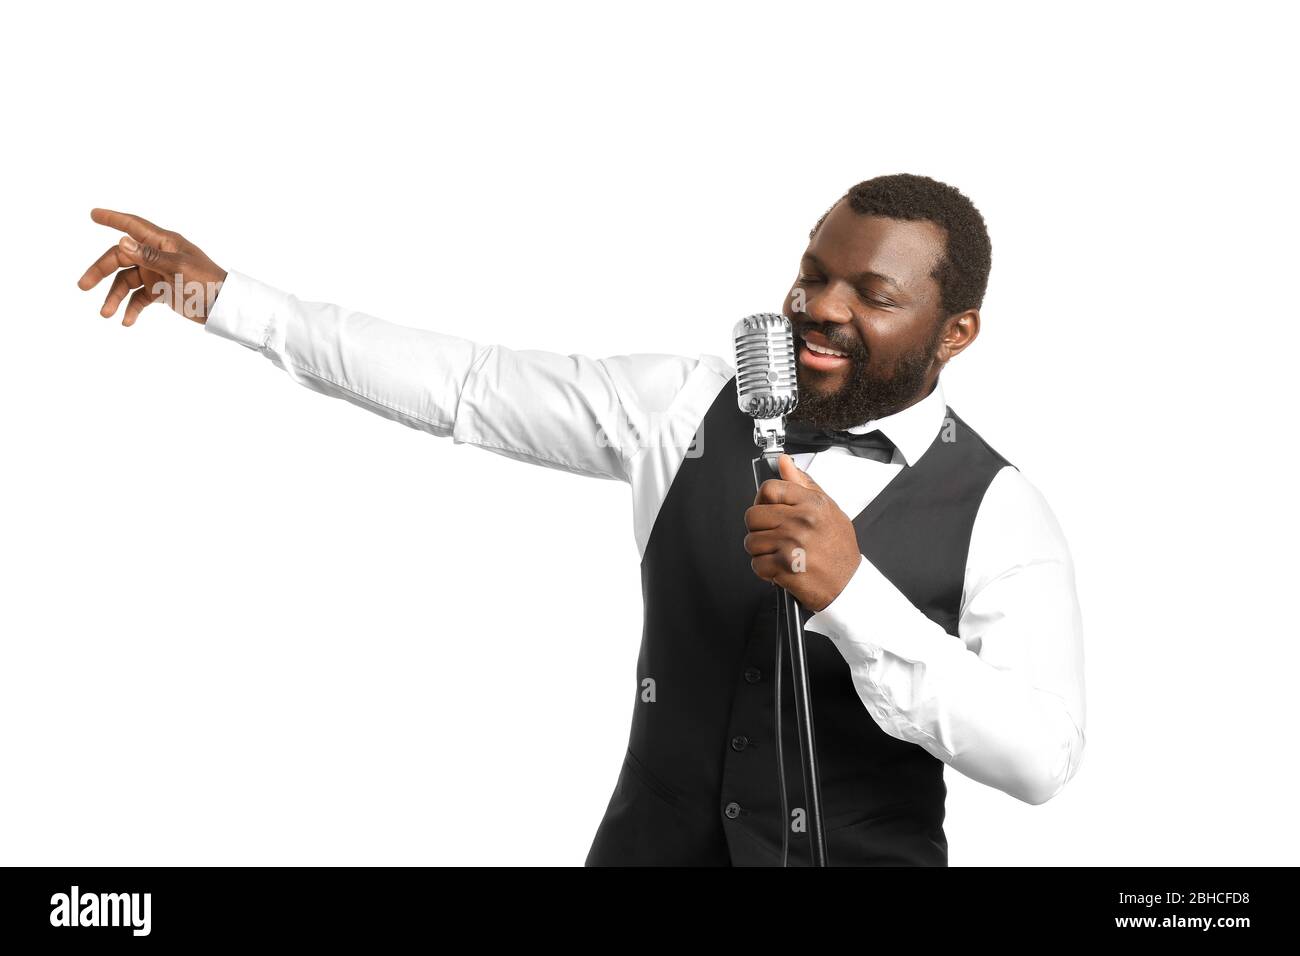 Male African-American singer on white background Stock Photo